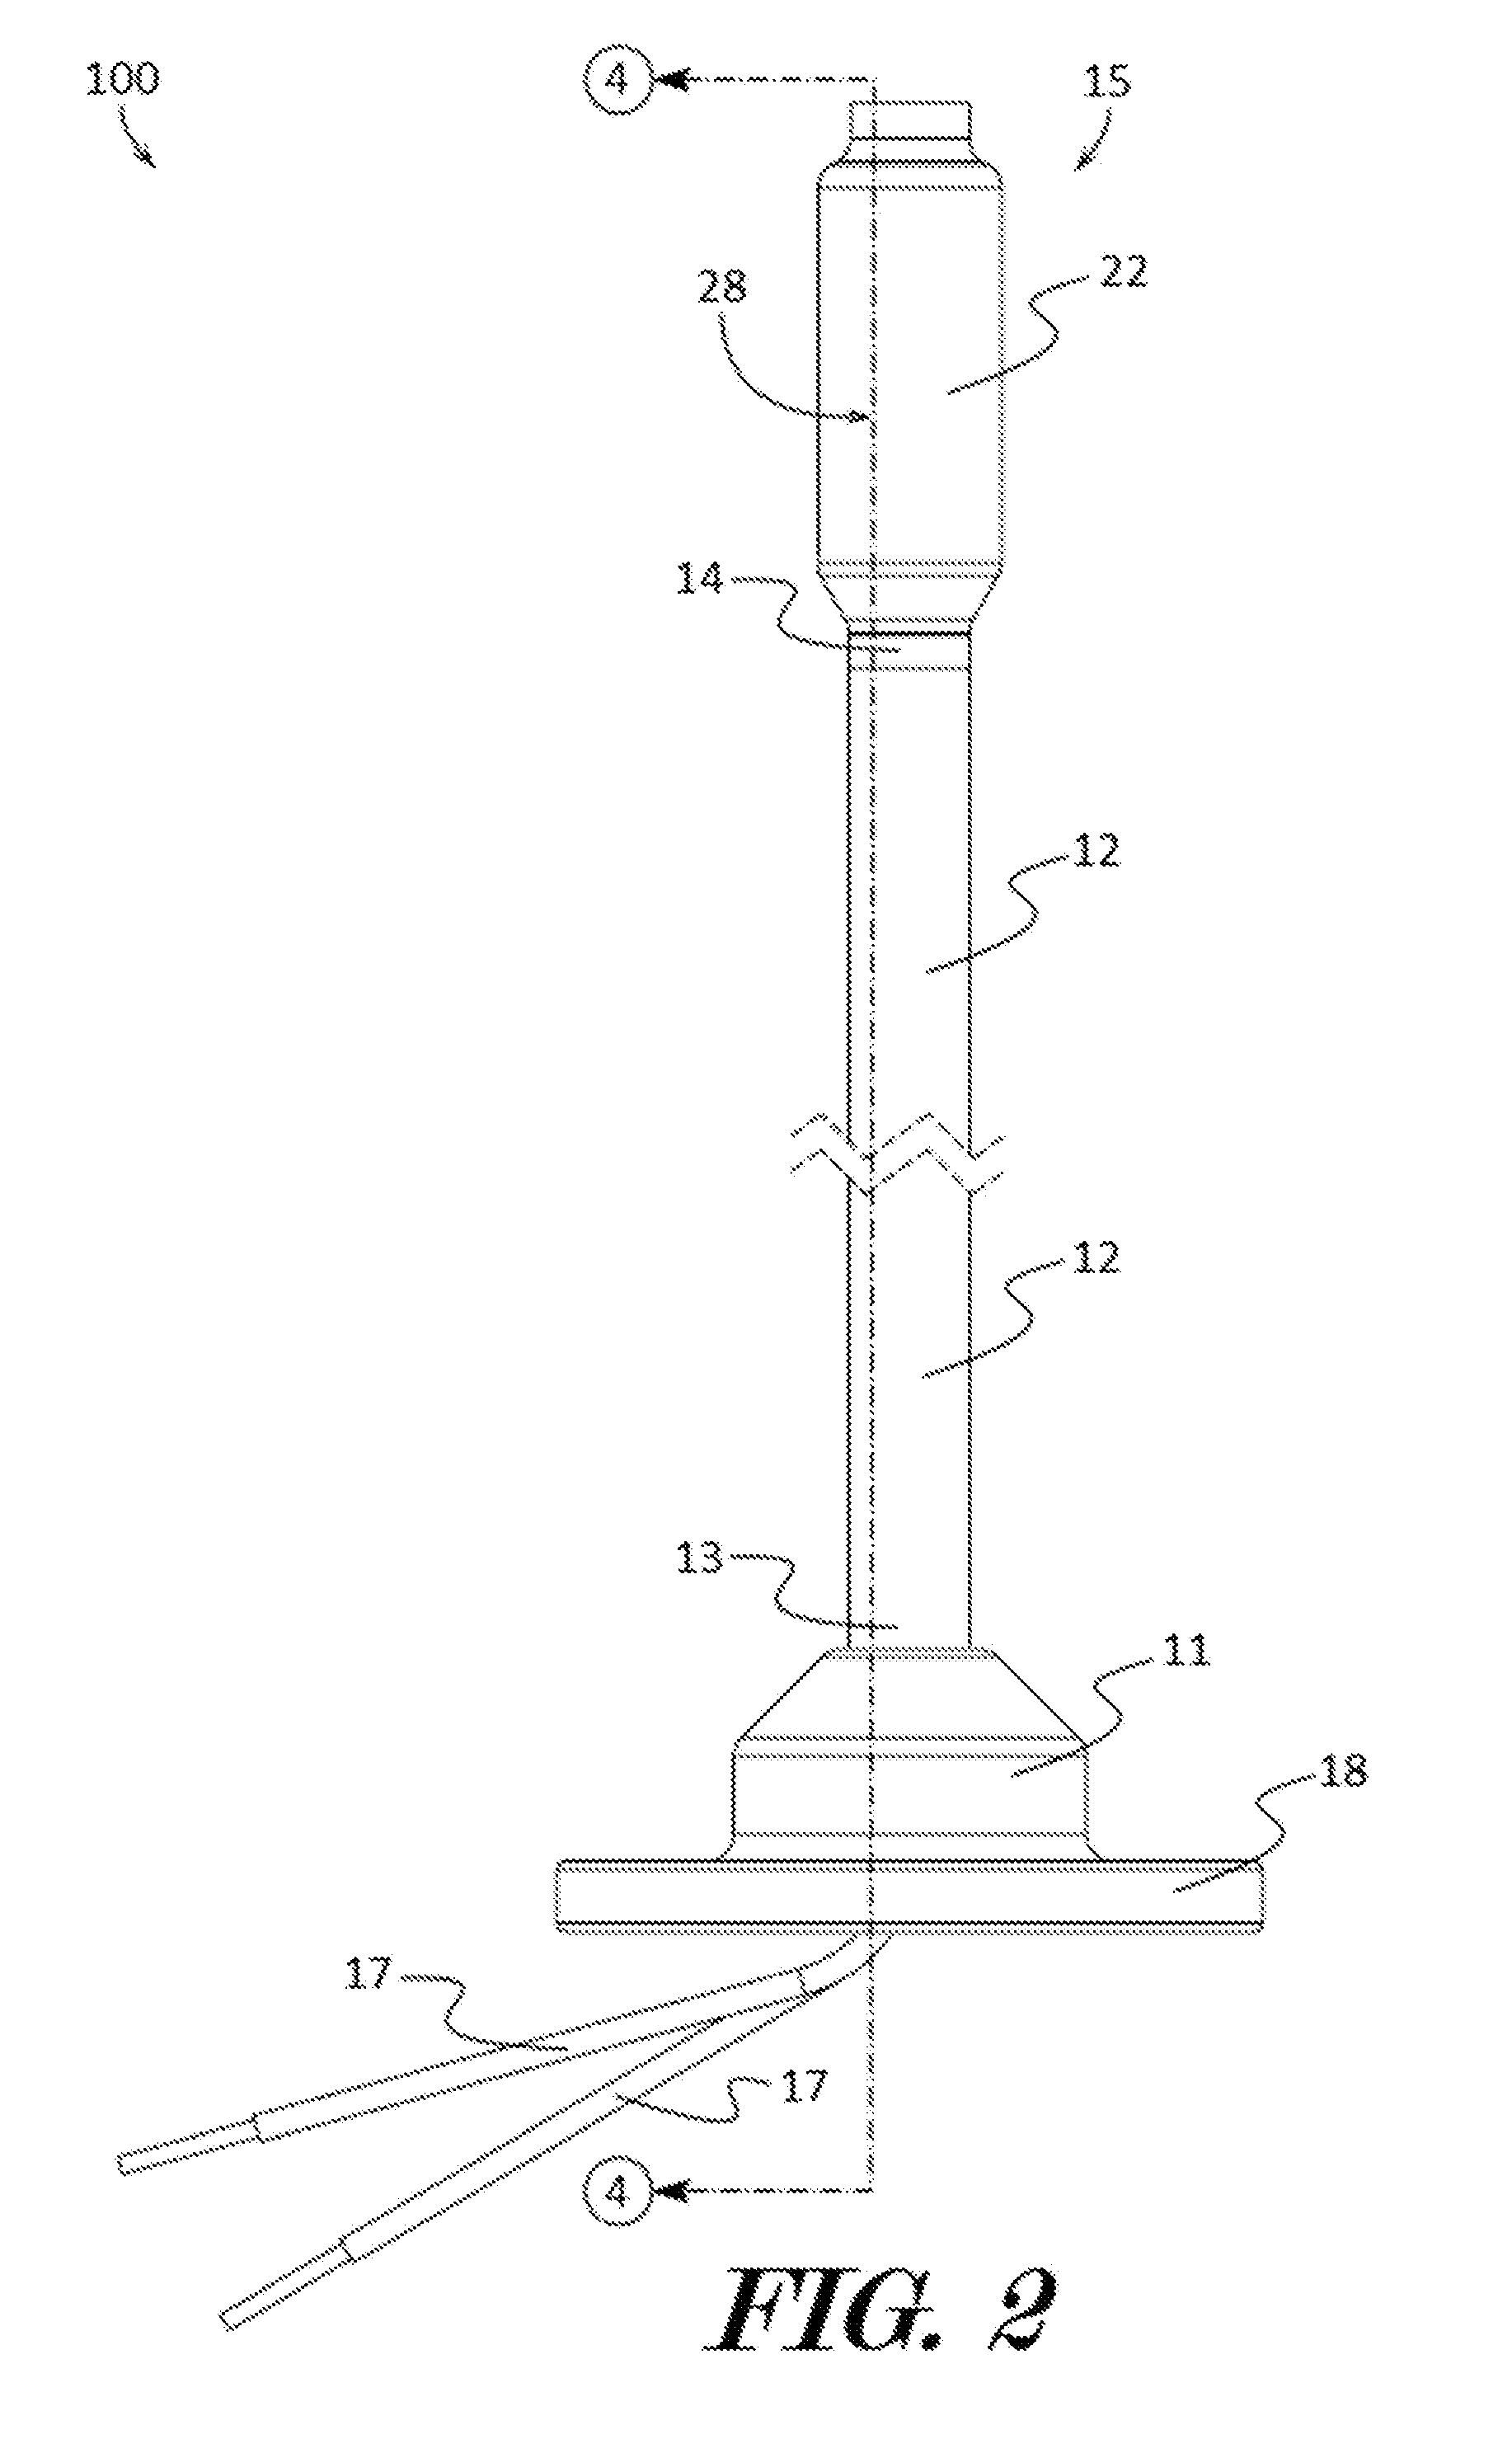 Marine navigation light apparatuses and methods of making the same